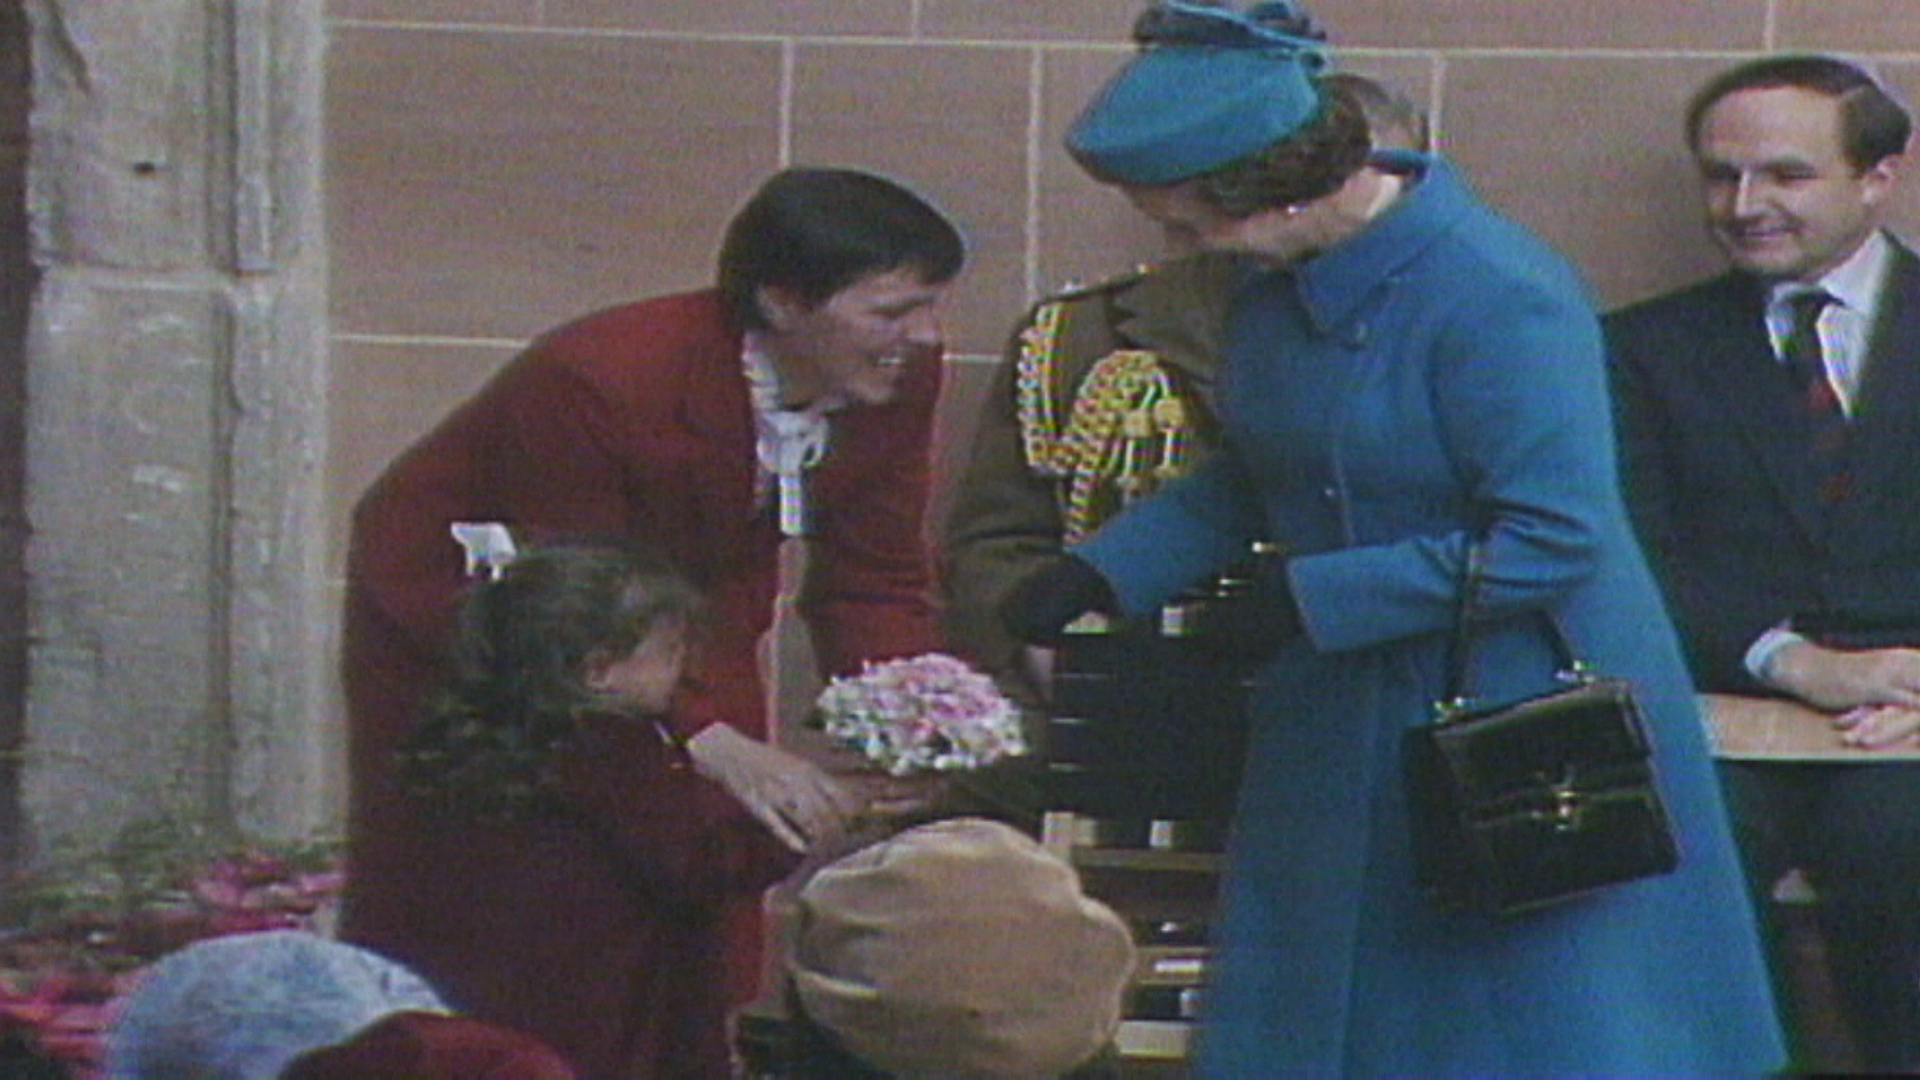 A schoolgirl was chosen to present the Queen with flowers and ended up making headlines when she burst into tears.